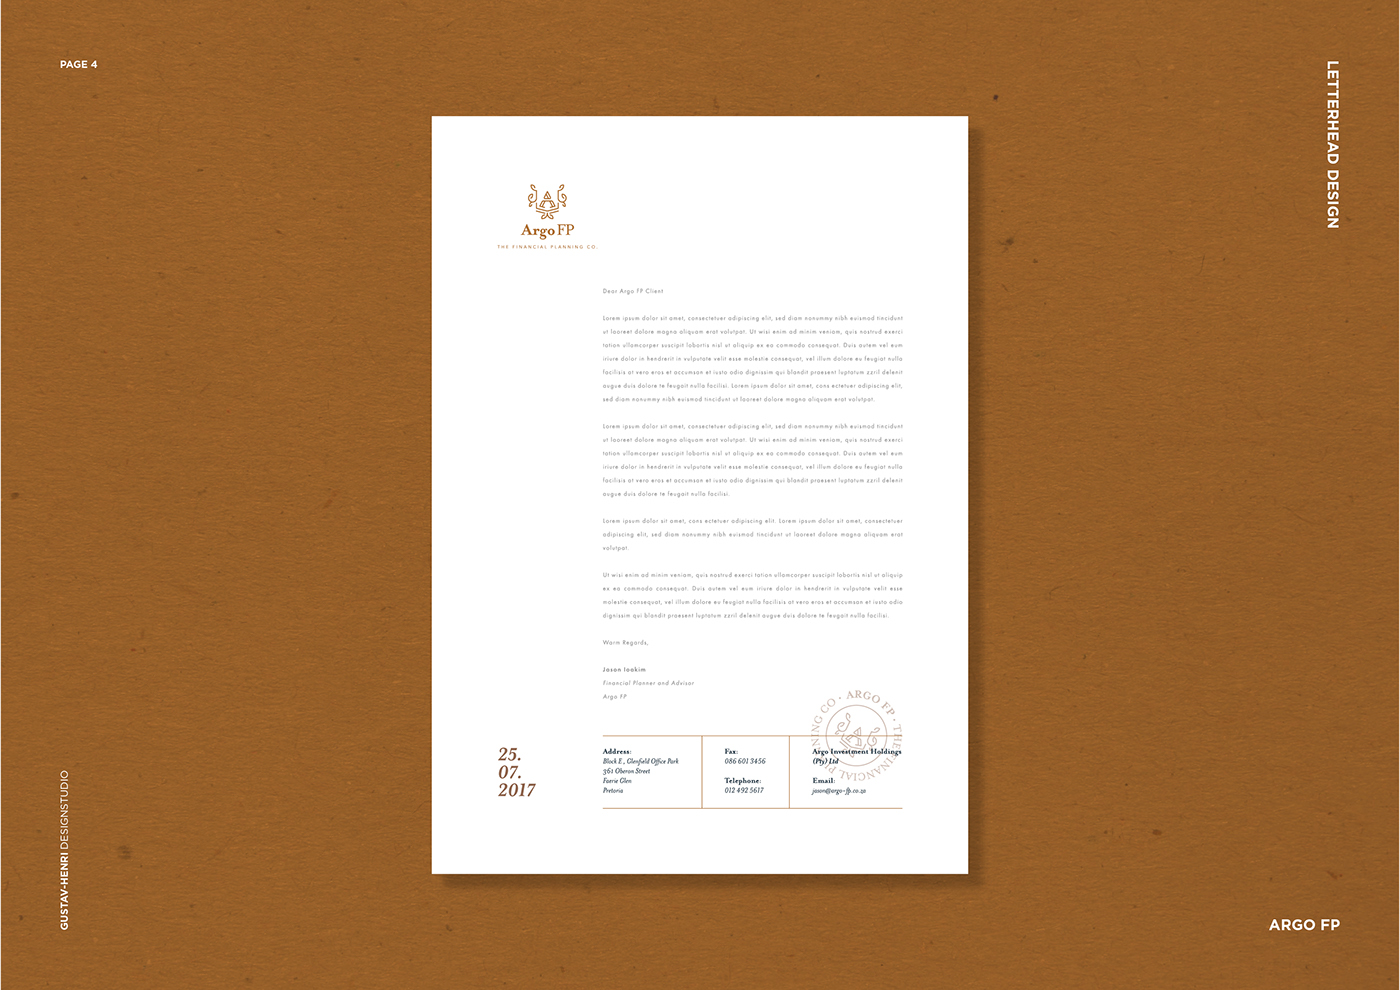 branding  Corporate Identity financial planners Logo Design Business Cards Stationery letterhead corporate Brand Image